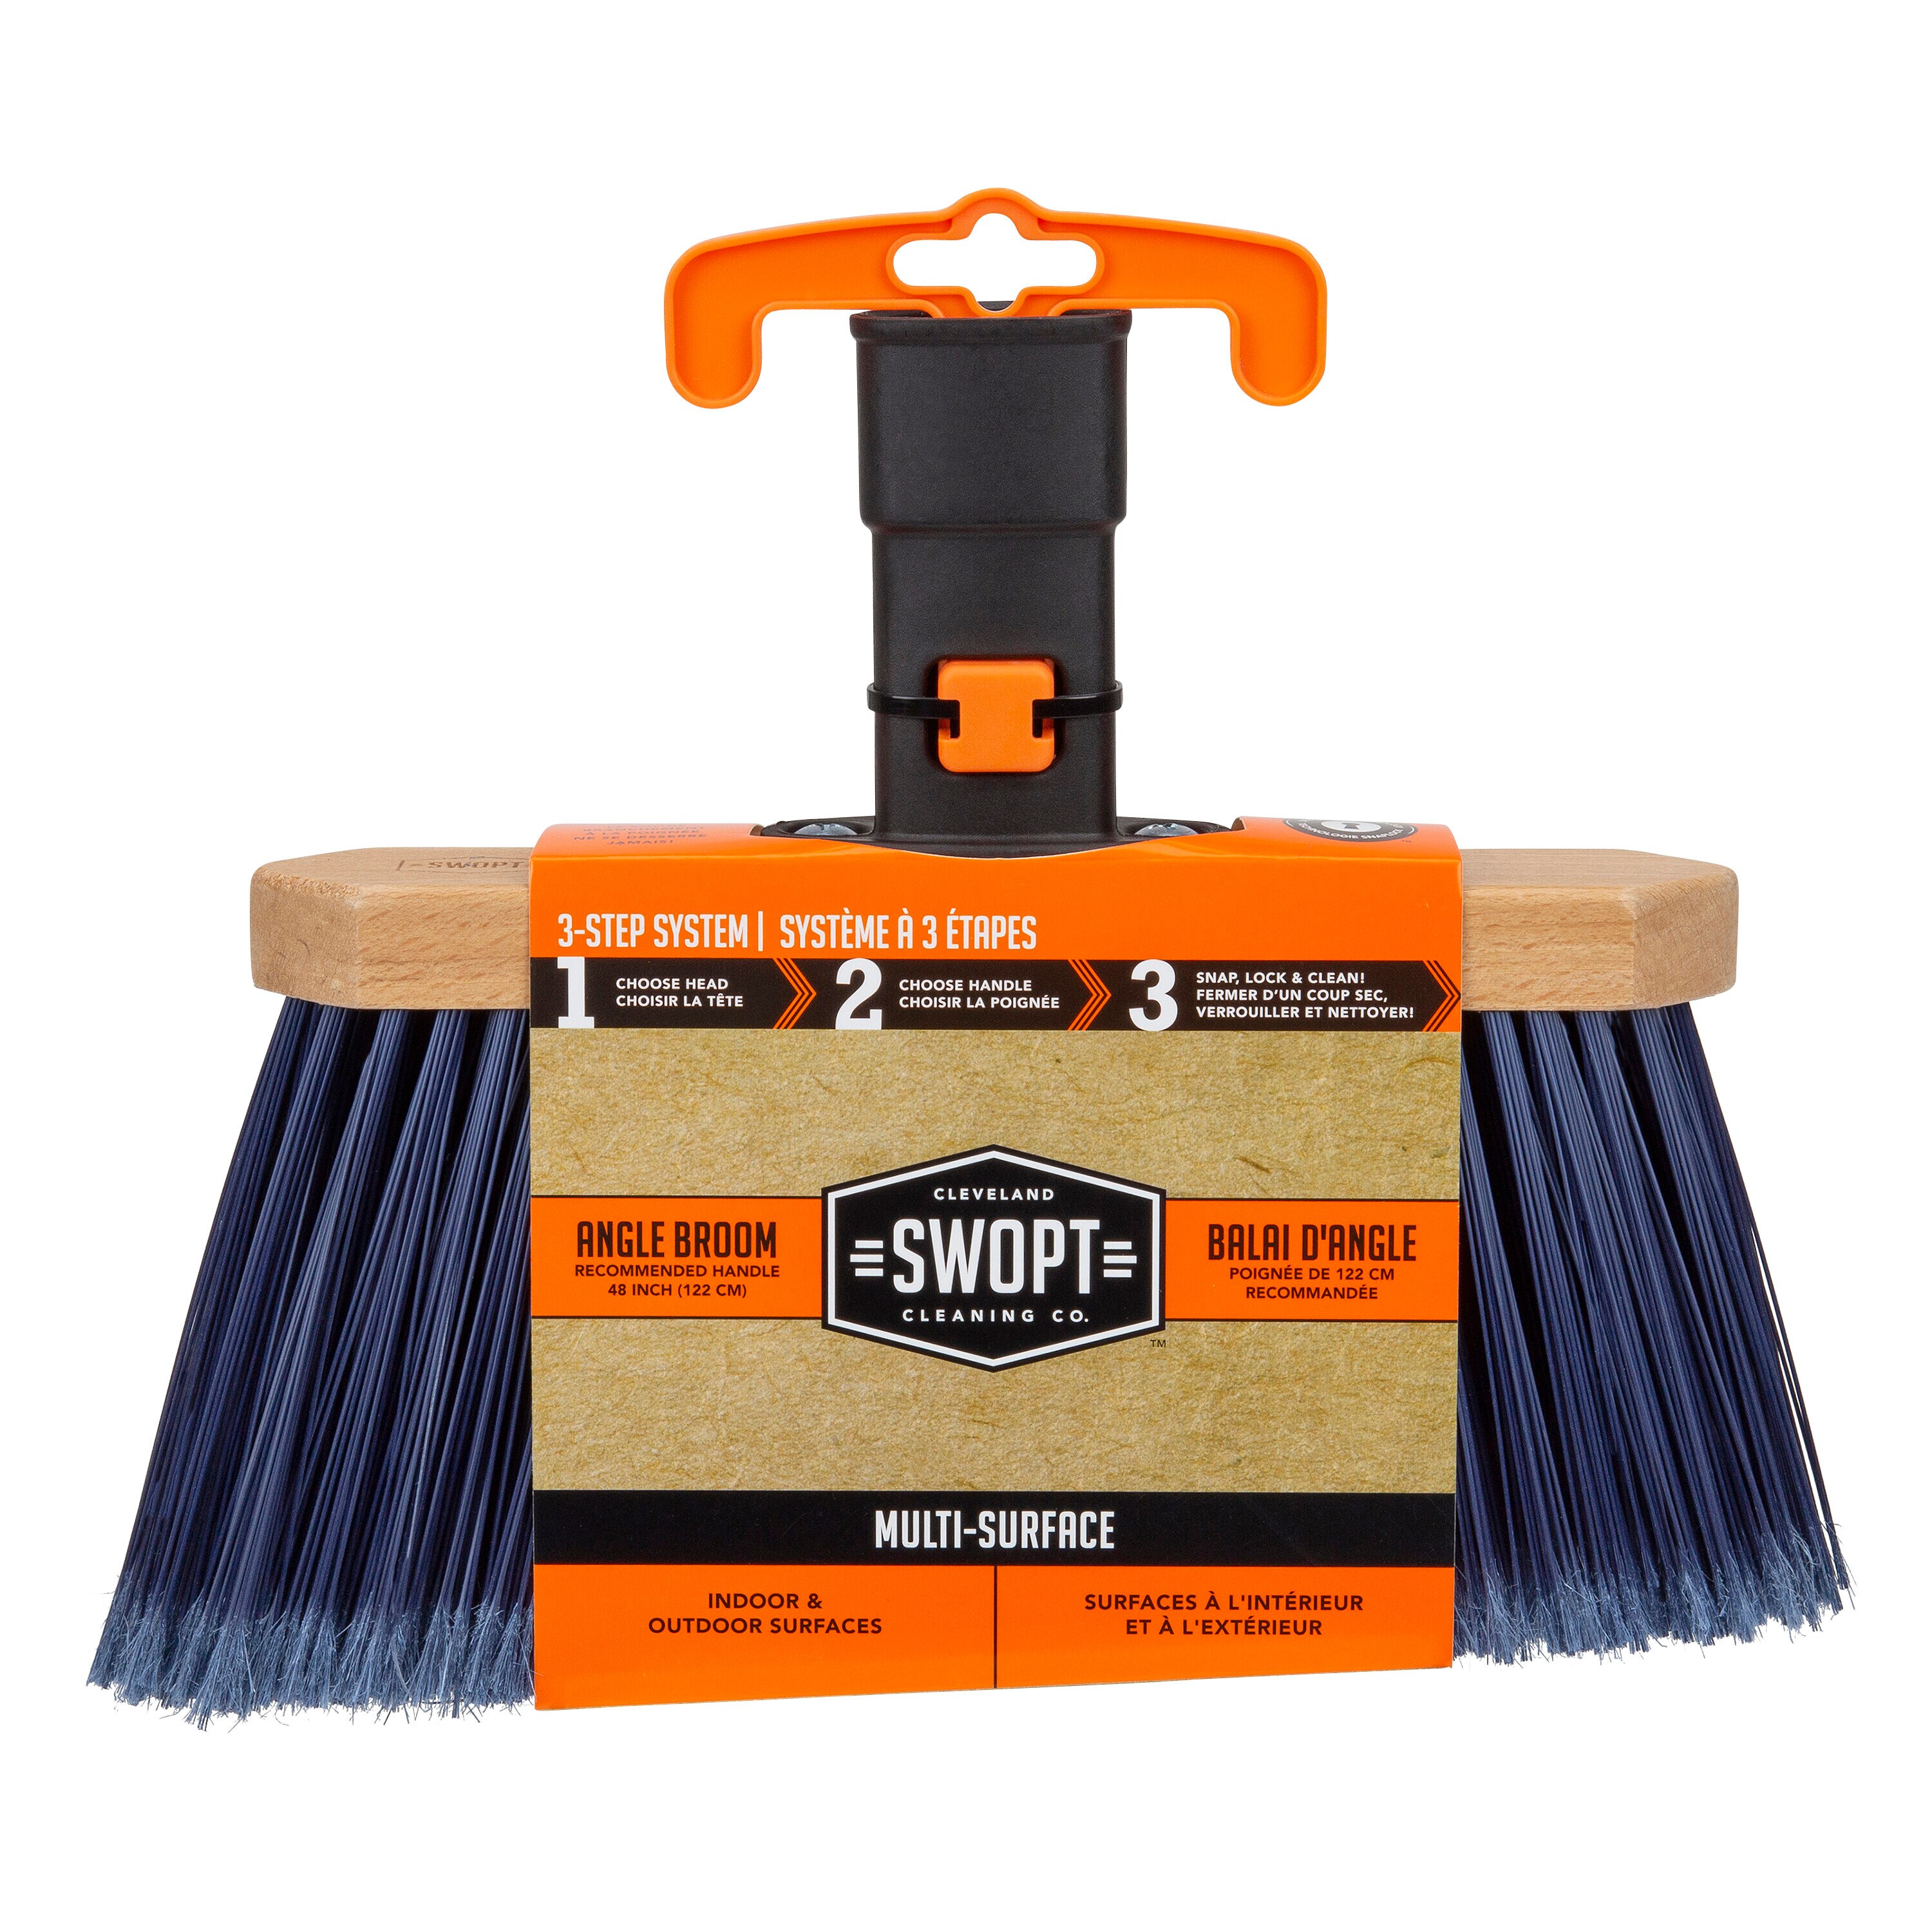 SWOPT Premium Multi-Surface Angle Broom, Cotton Mop + 48” & 60 EVA Foam  Comfort Grip Wooden Handles, Combo — Cleaning Heads with Long Handles